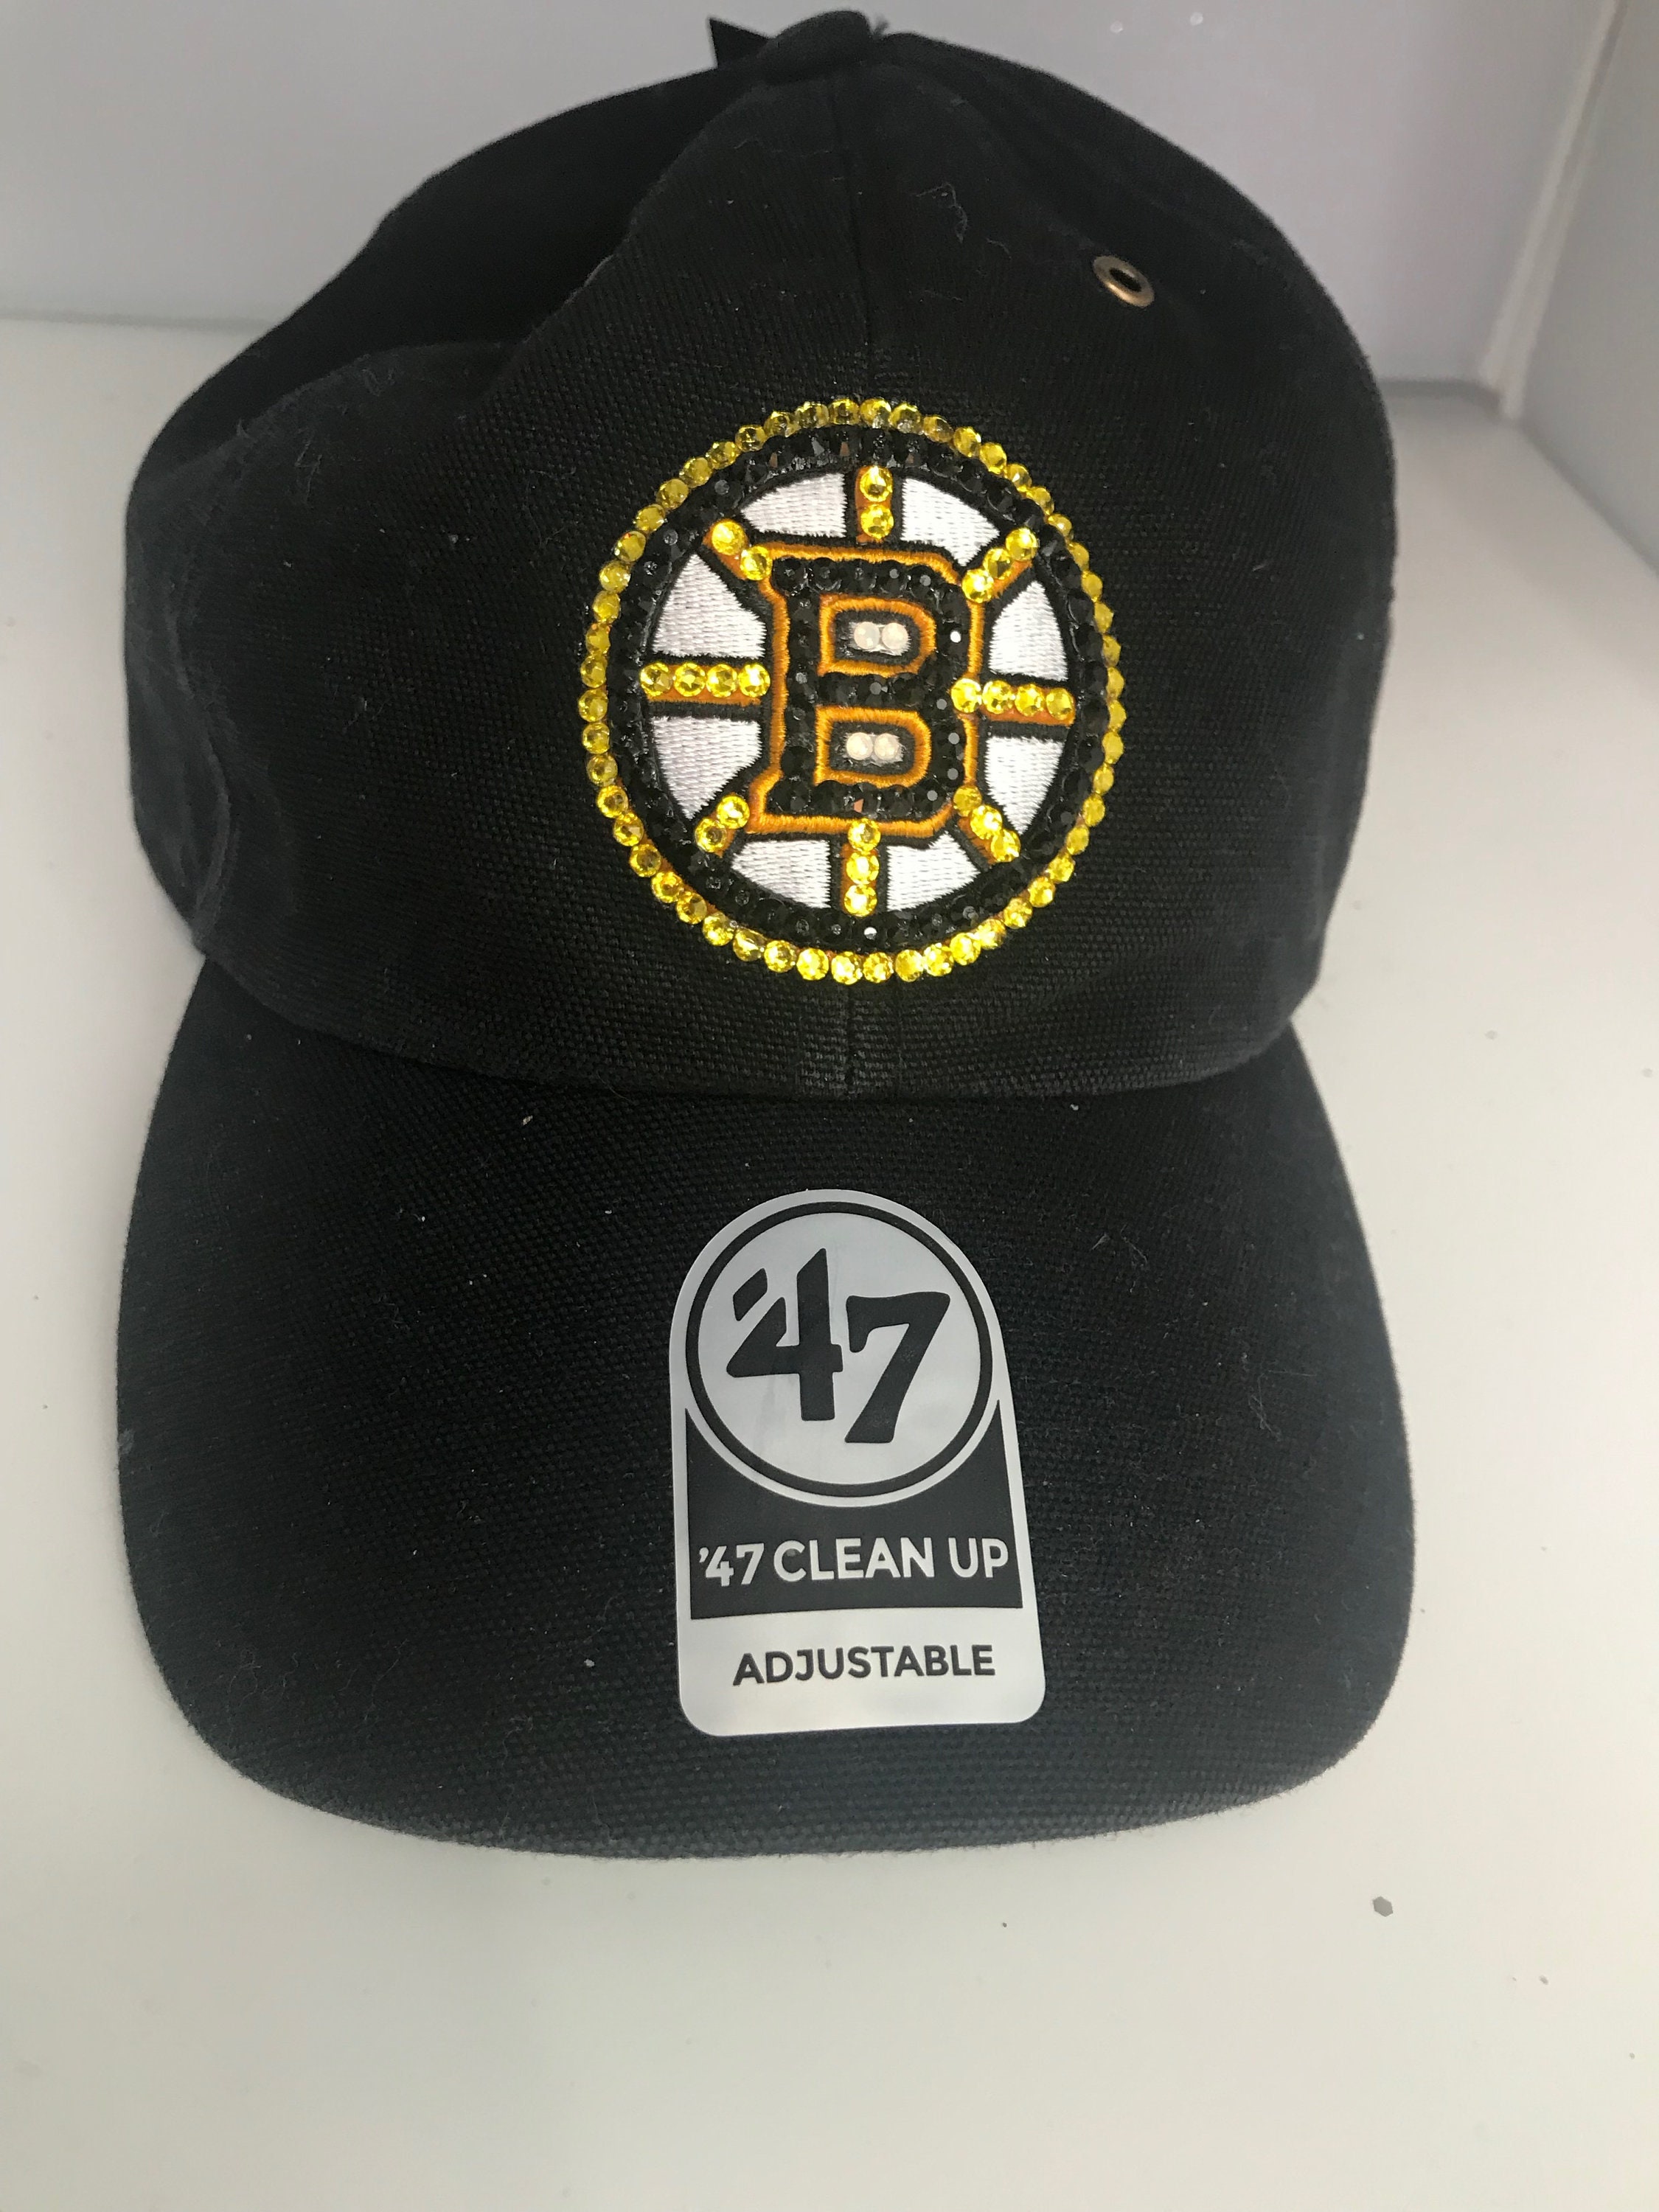 New hat. I absolutely love this logo : r/BostonBruins